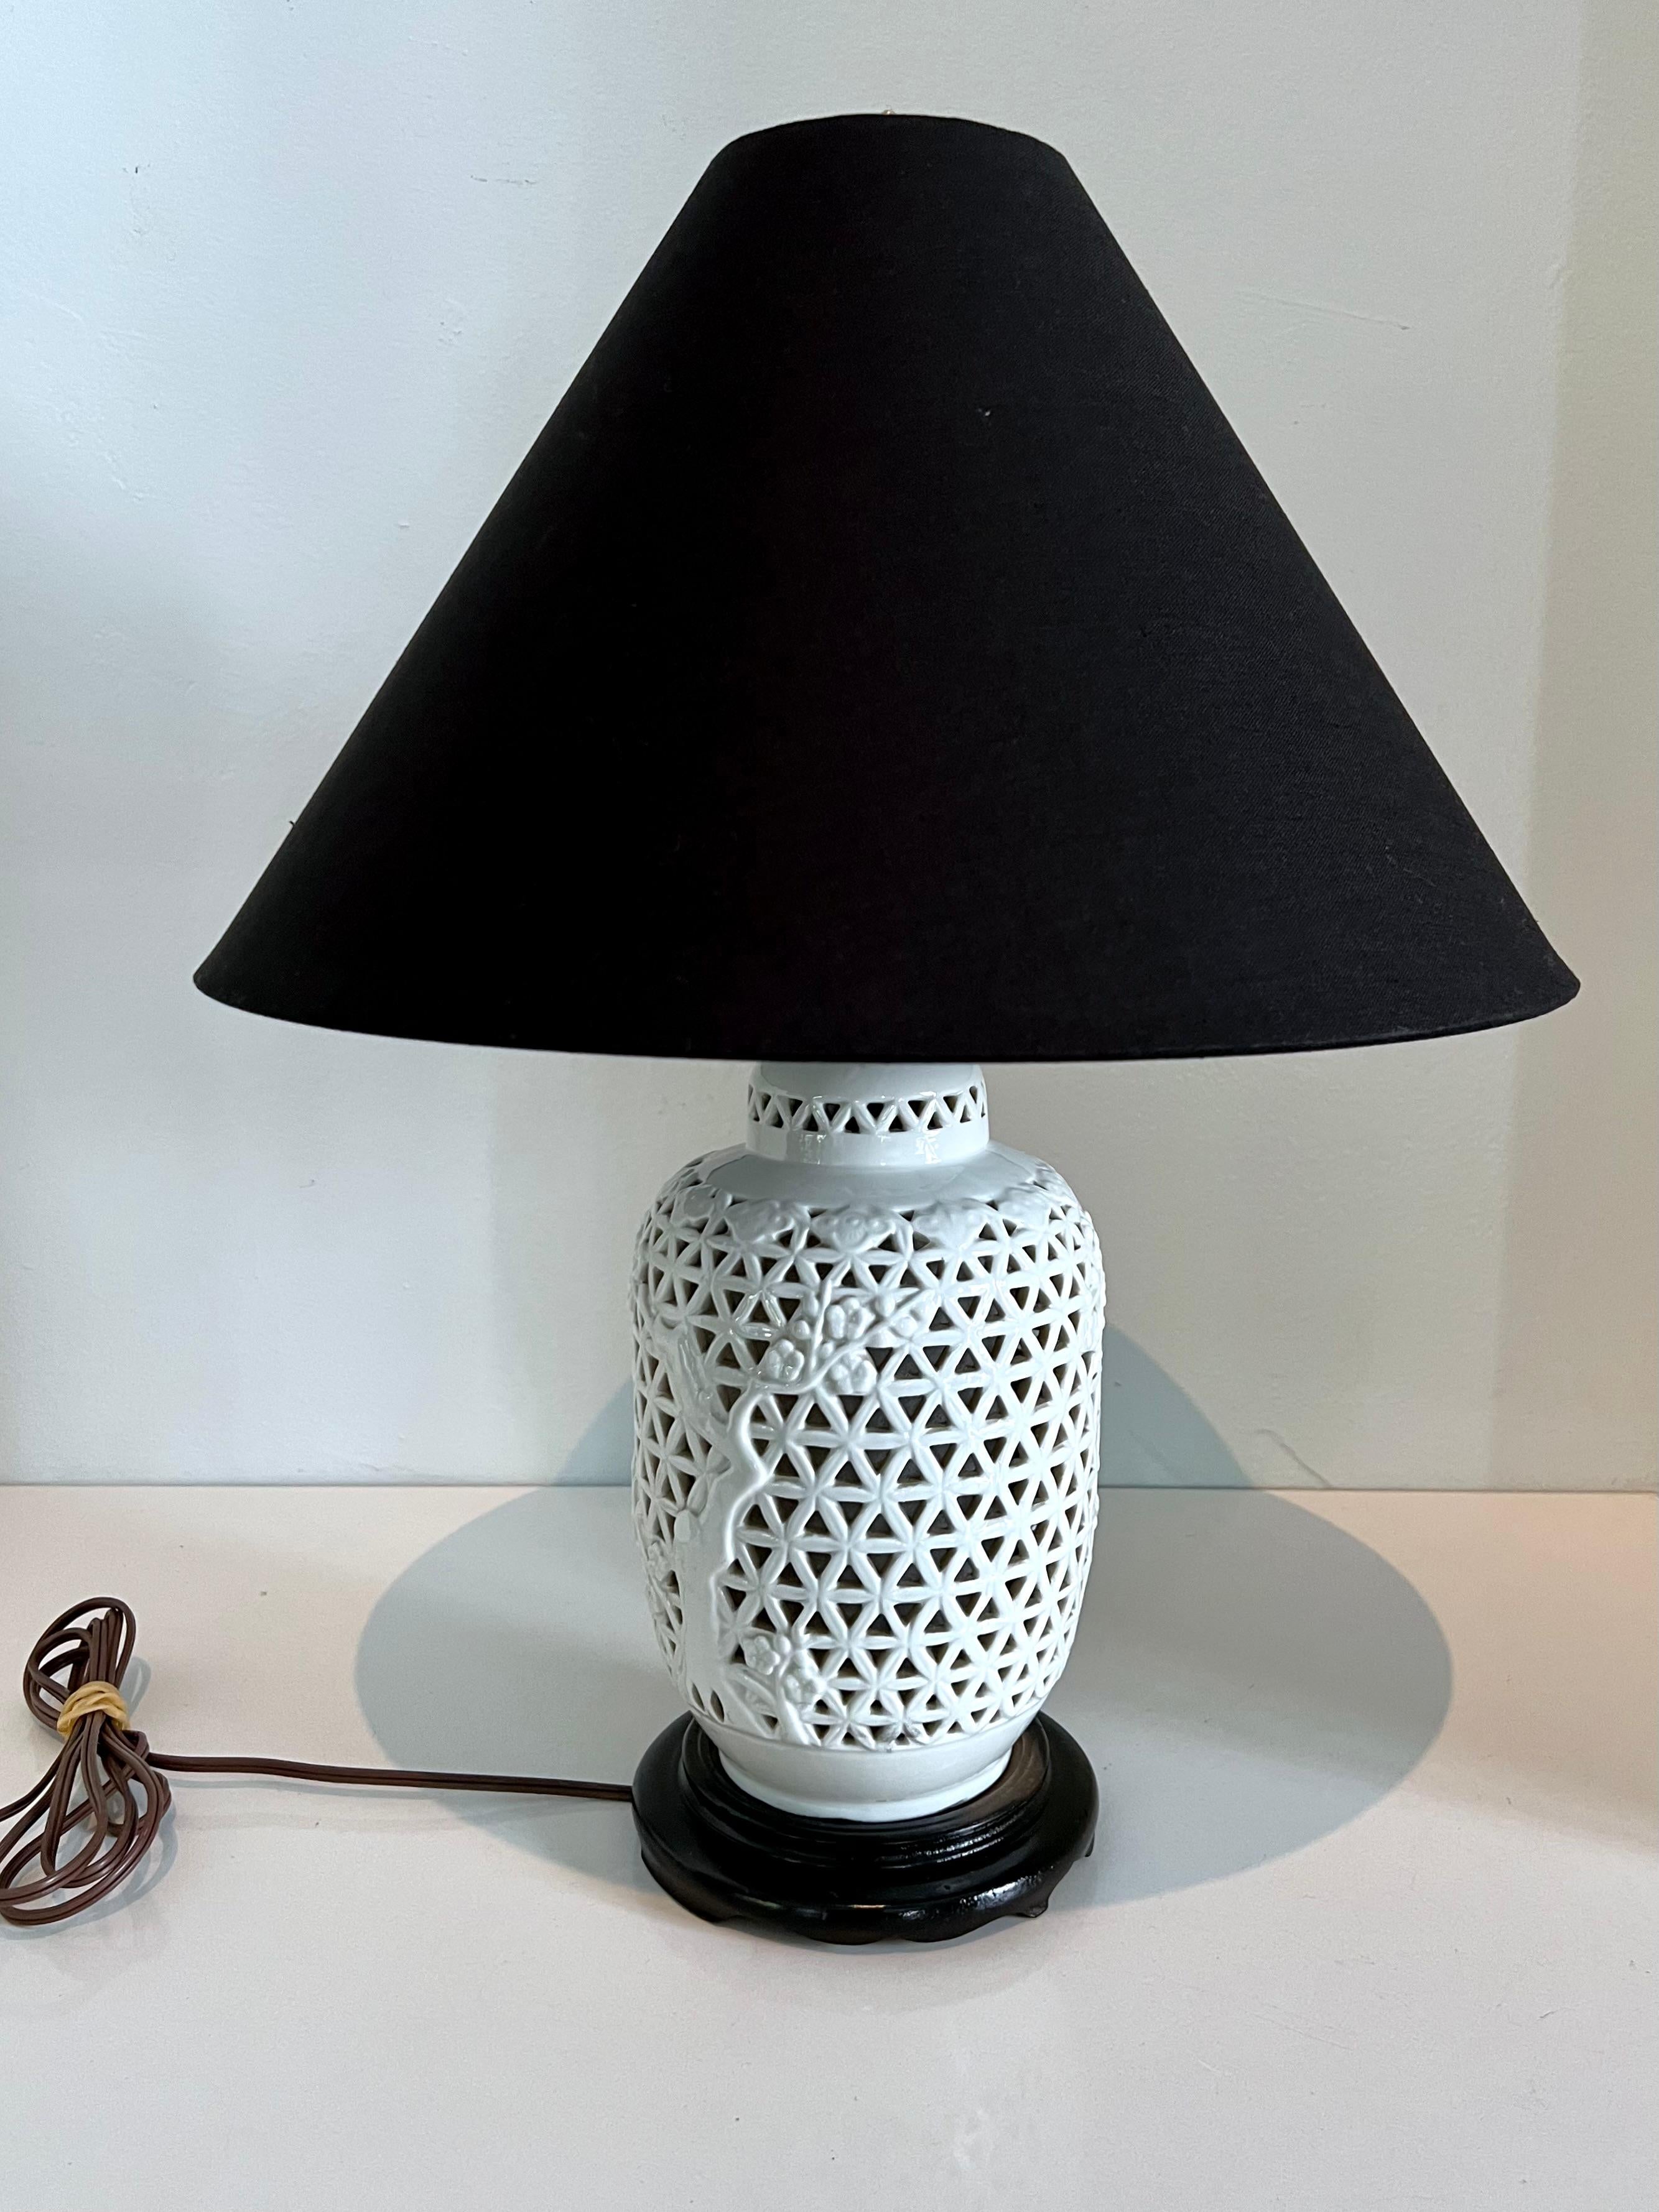 Gorgeous pierced blanc de chine lamp on black base with new custom black lampshade. A rotary on-off switch. Adds light and sophistication to any room, desk or side table

Measures: Base is 11